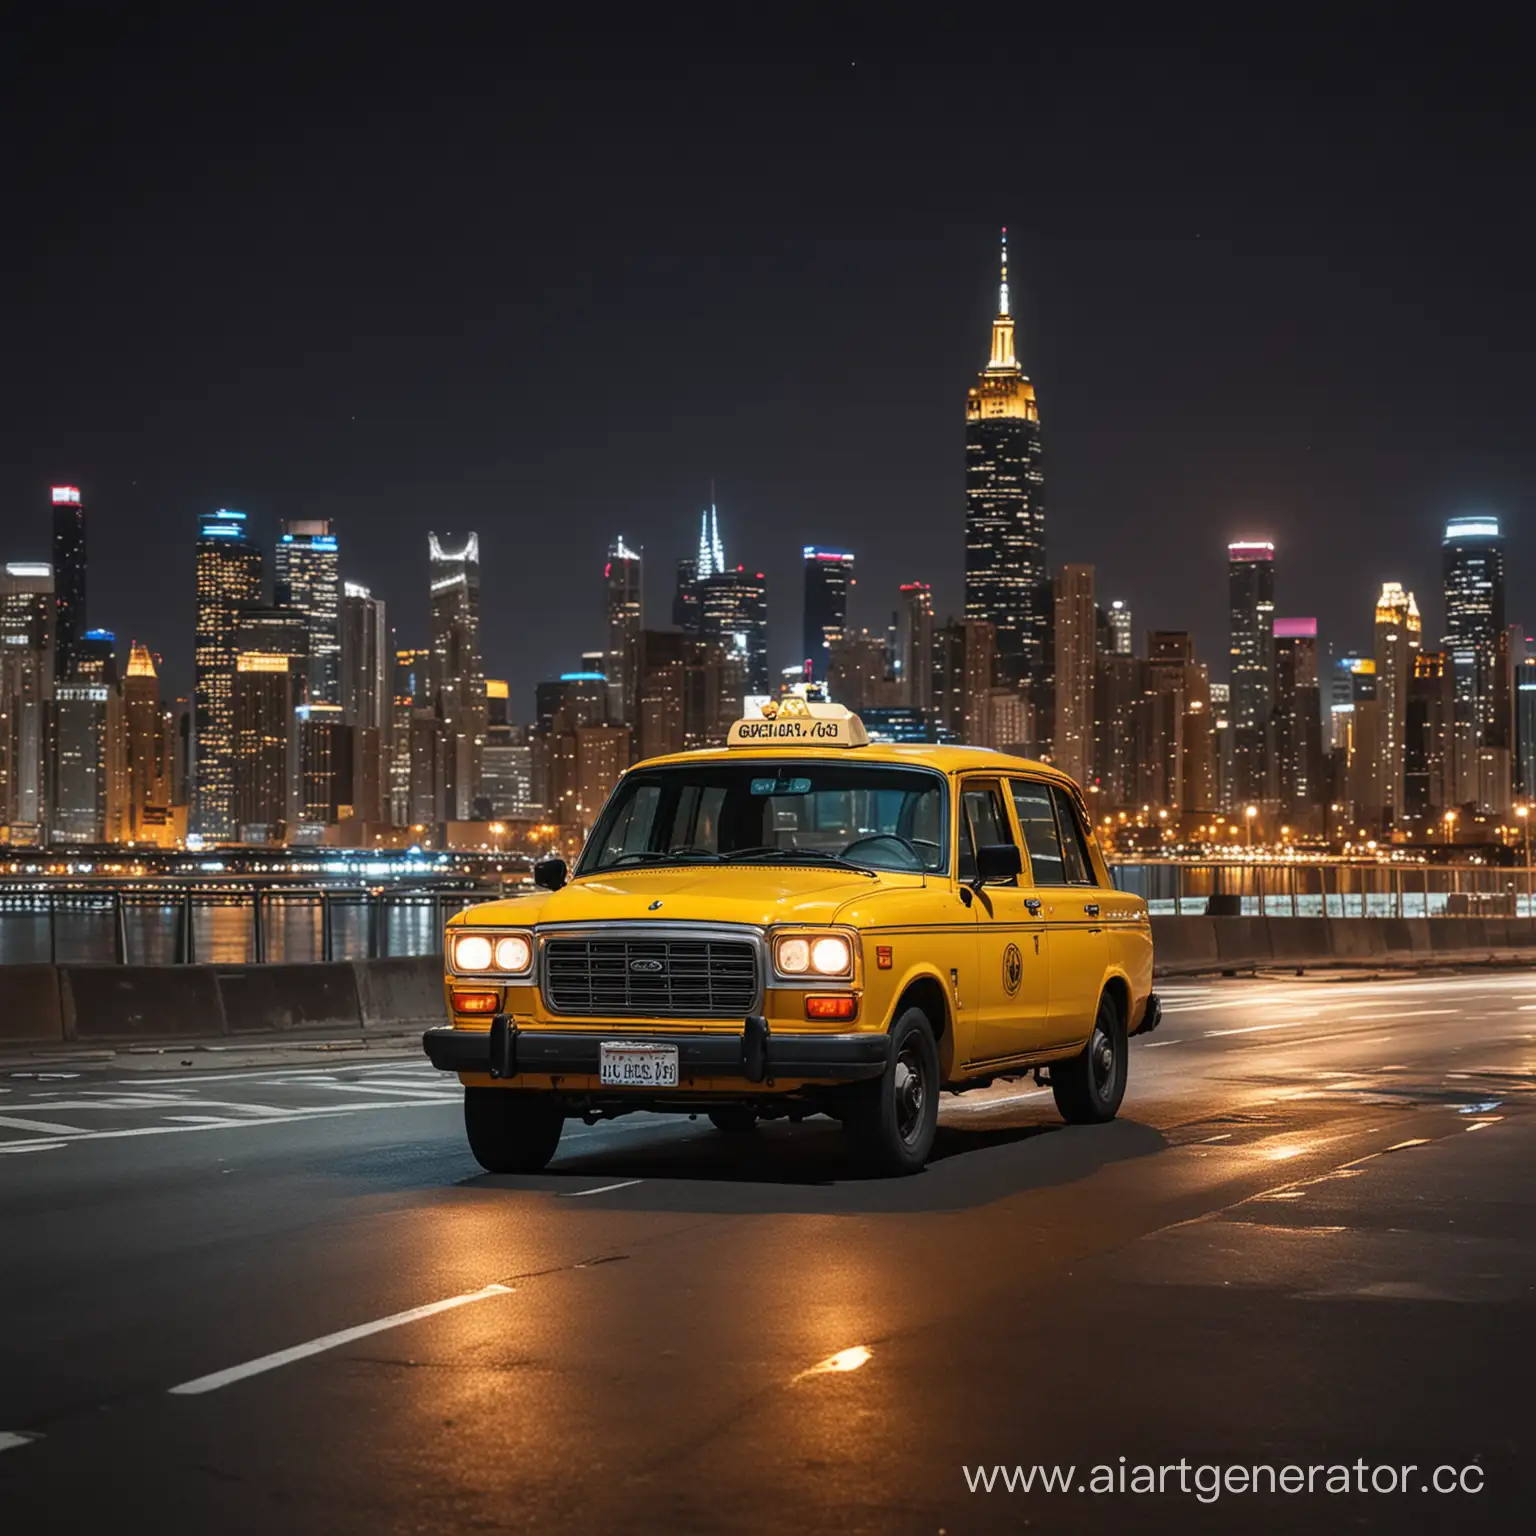 yellow cab against the backdrop of the city at night